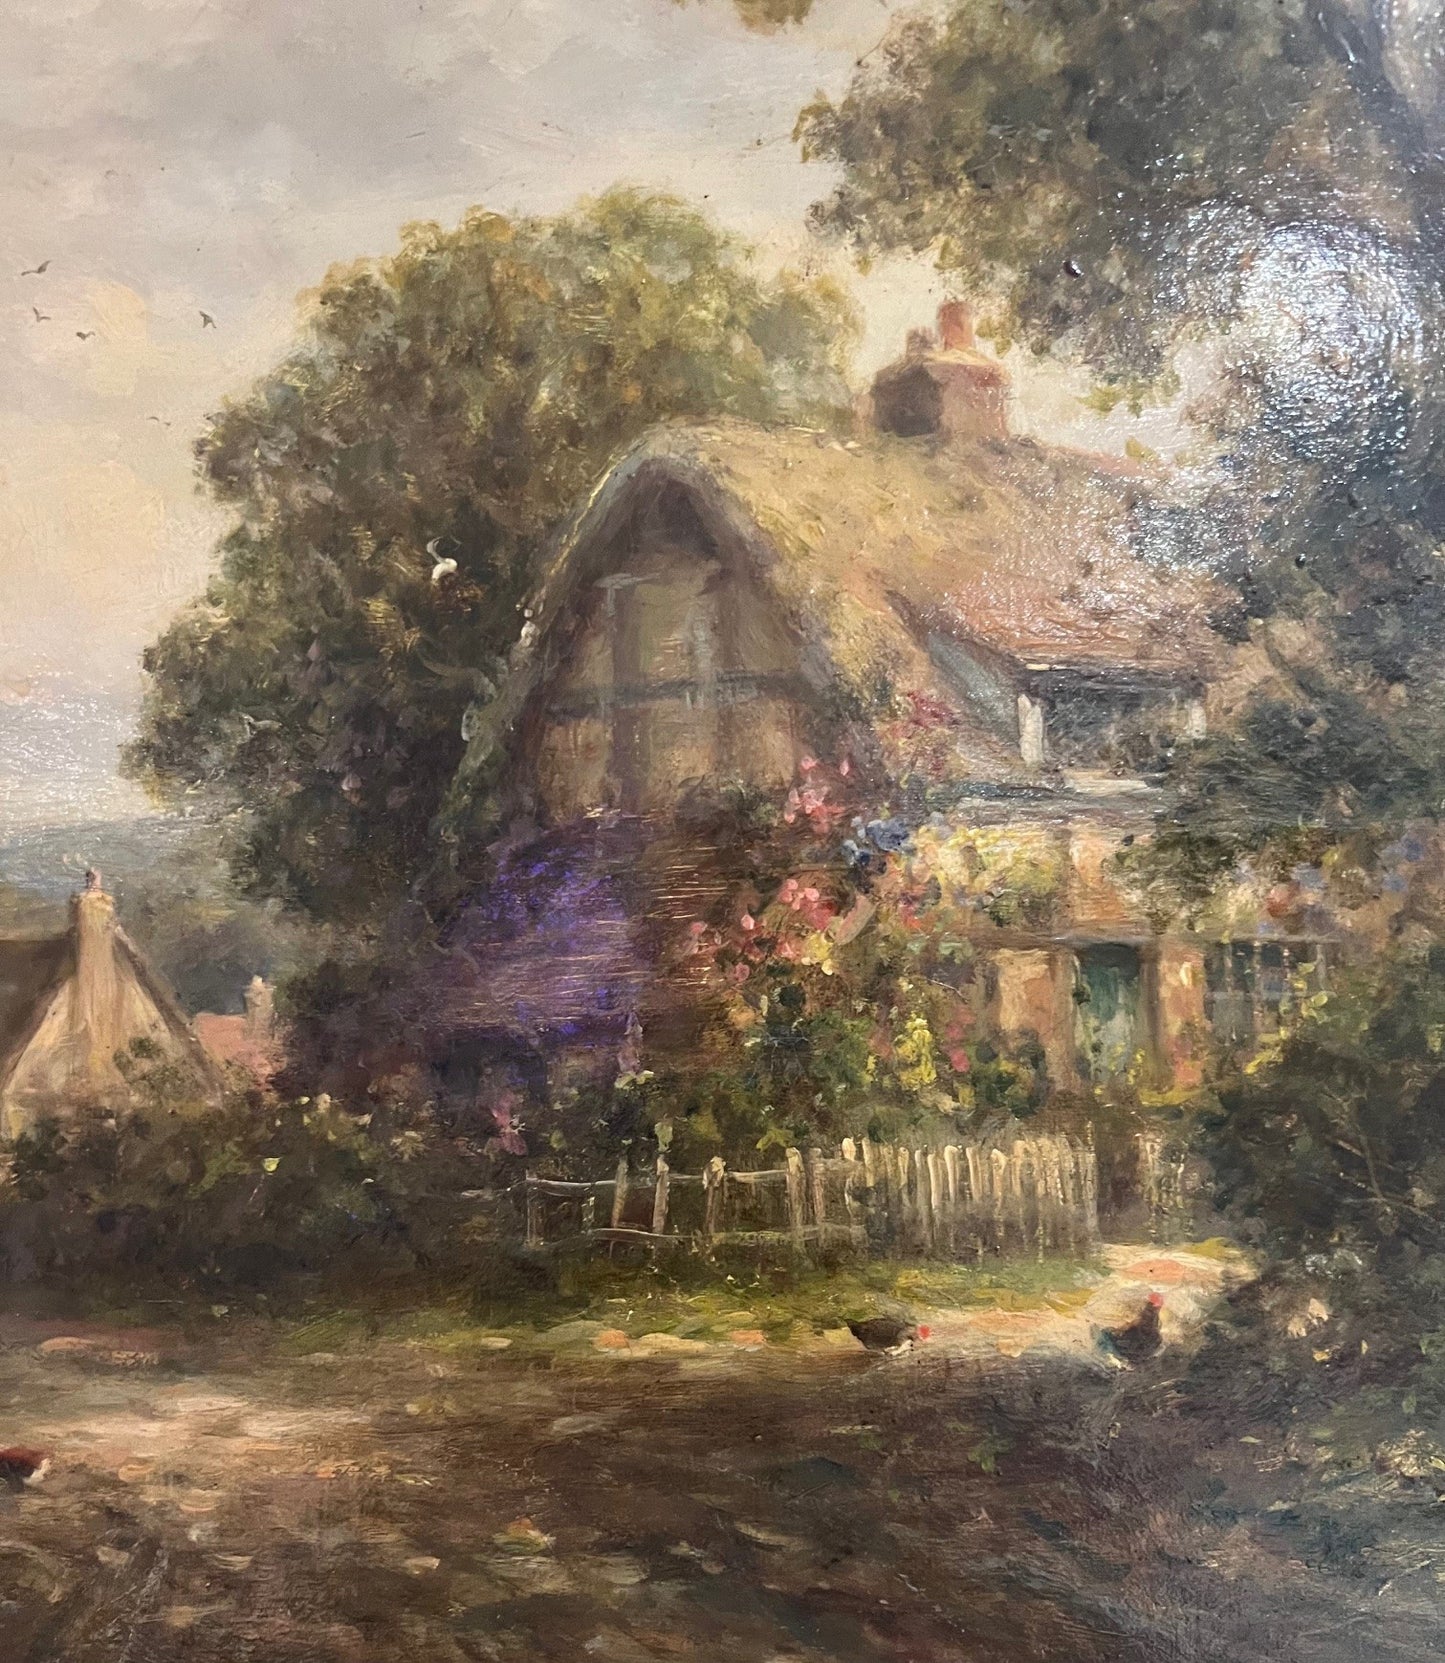 DANIEL SHERRIN 1868-1940 OIL ON CANVAS LANDSCAPE WITH THATCHED COTTAGE